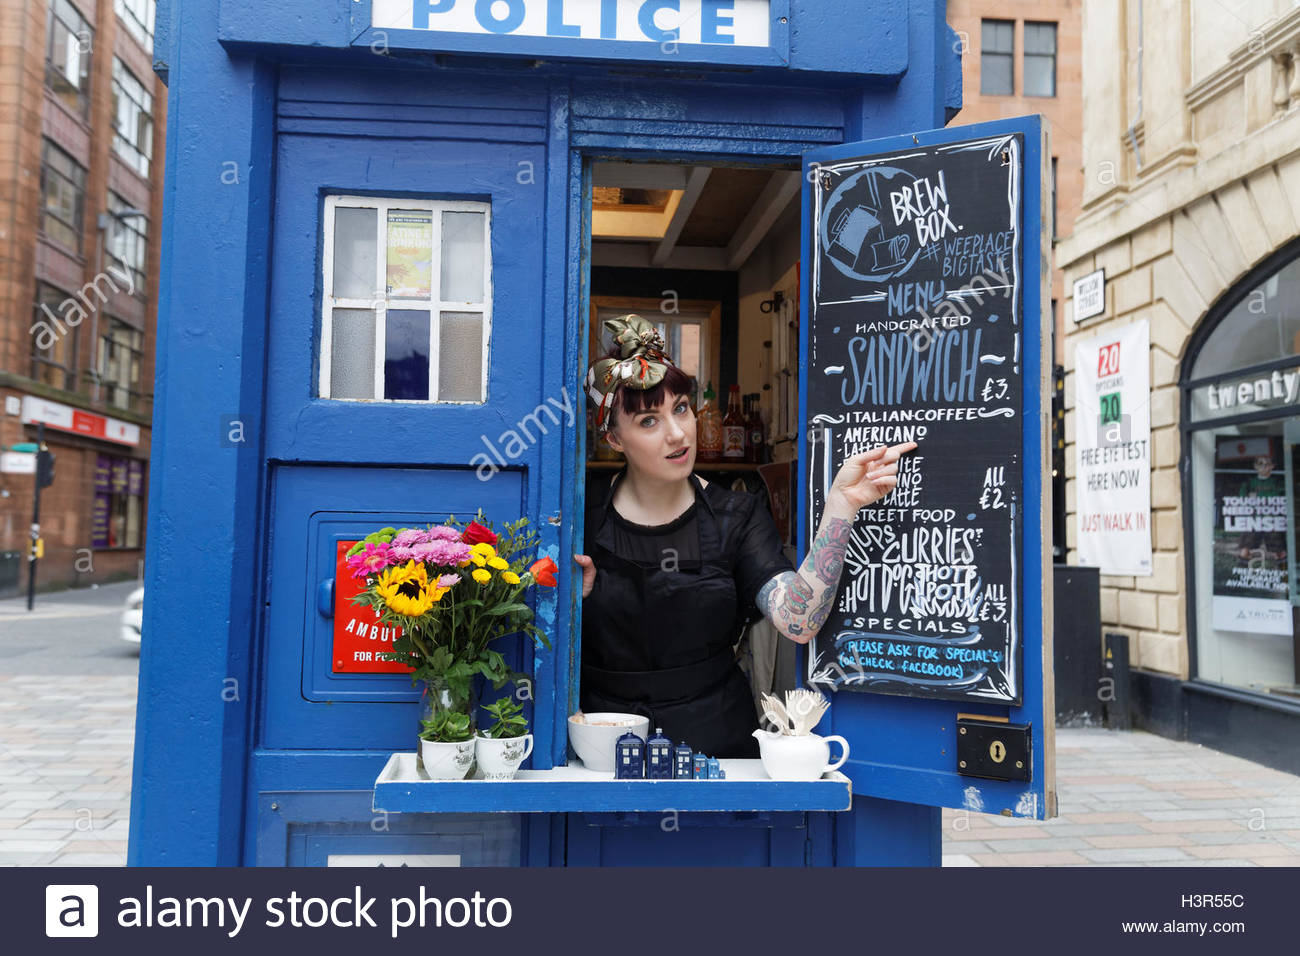 coffee-sandwich-bar-in-a-glasgow-police-box-which-is-made-famous-as-H3R55C.jpg